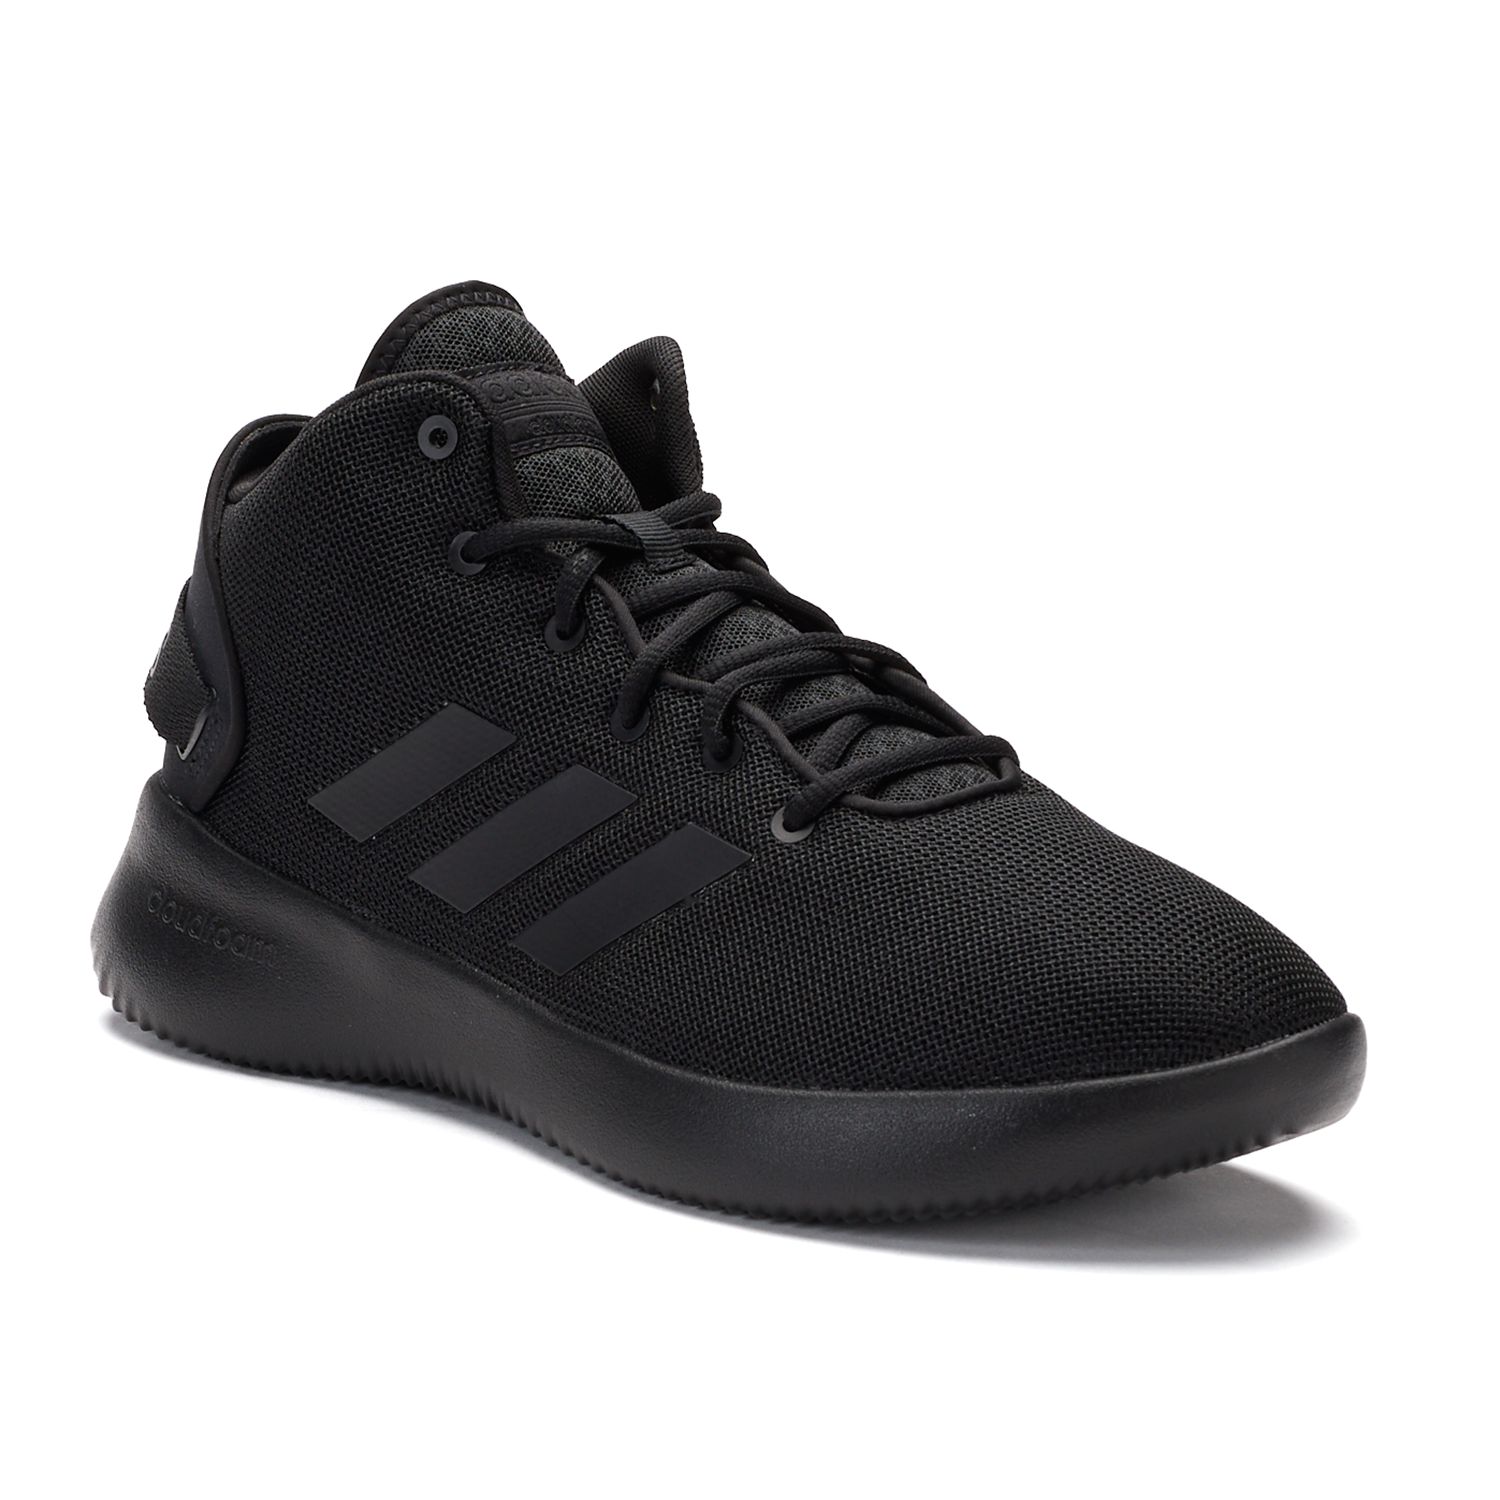 adidas cloudfoam refresh mid shoes